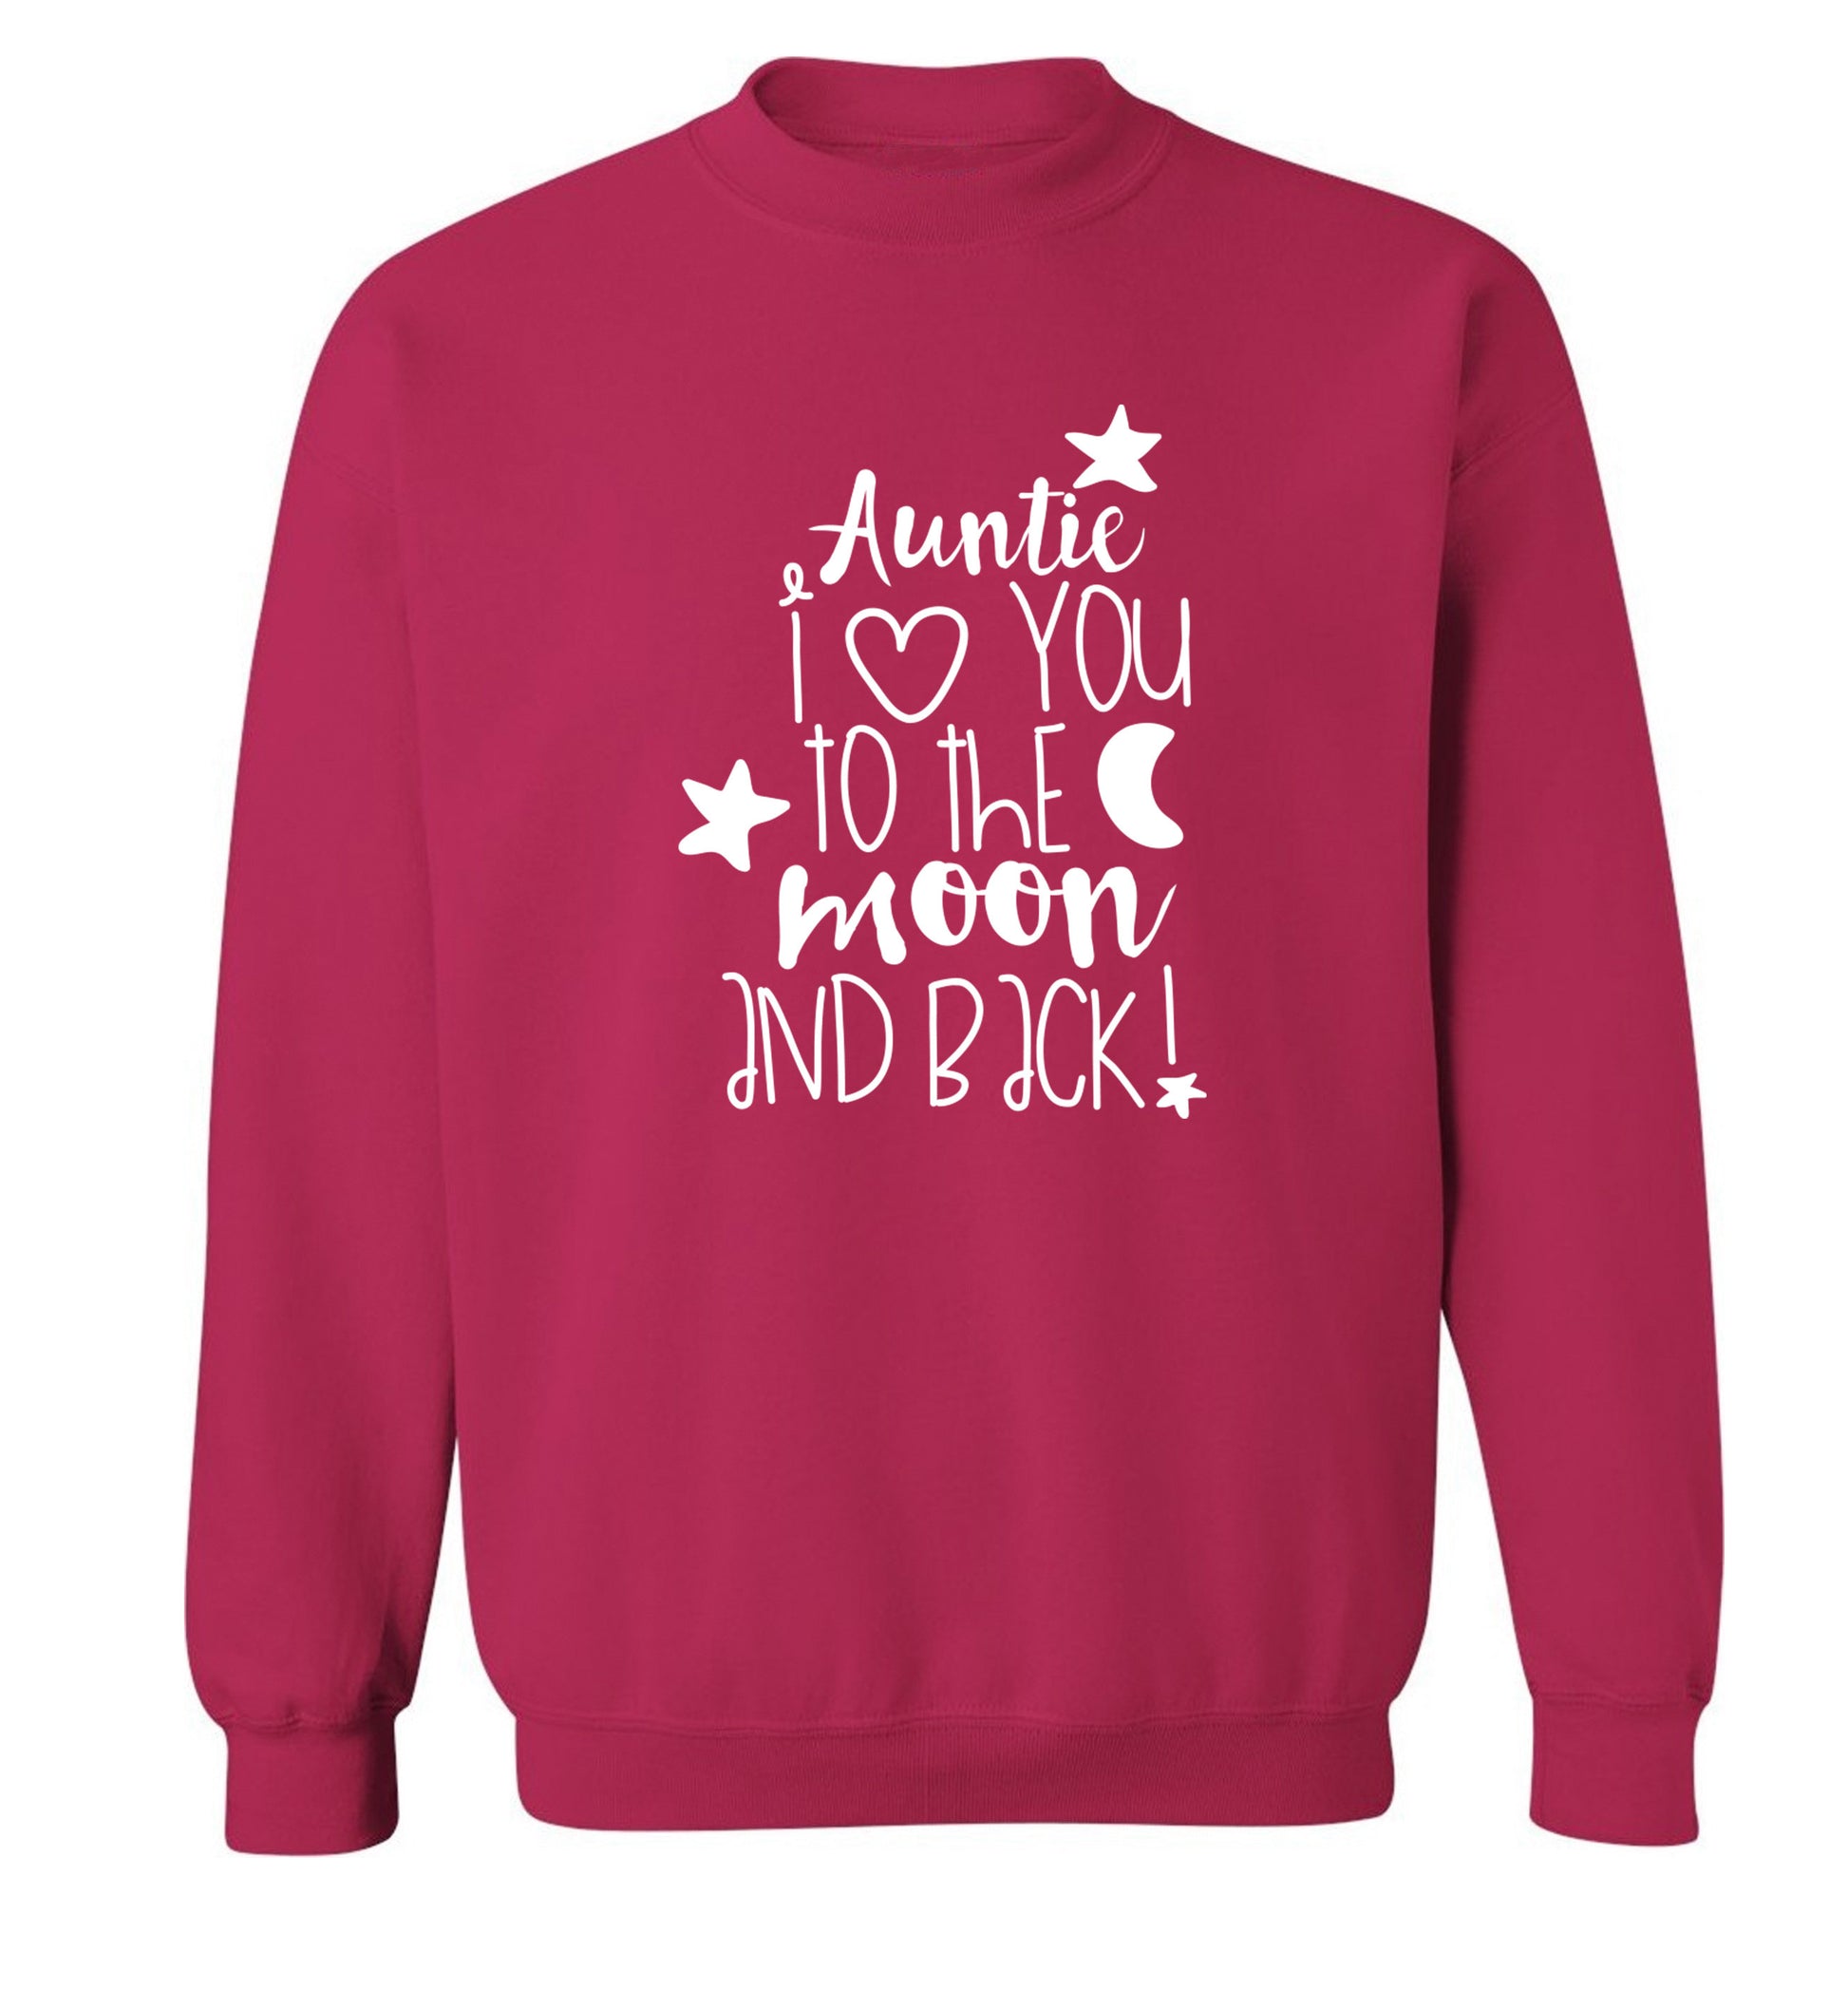 Auntie I love you to the moon and back Adult's unisex pink  sweater XL